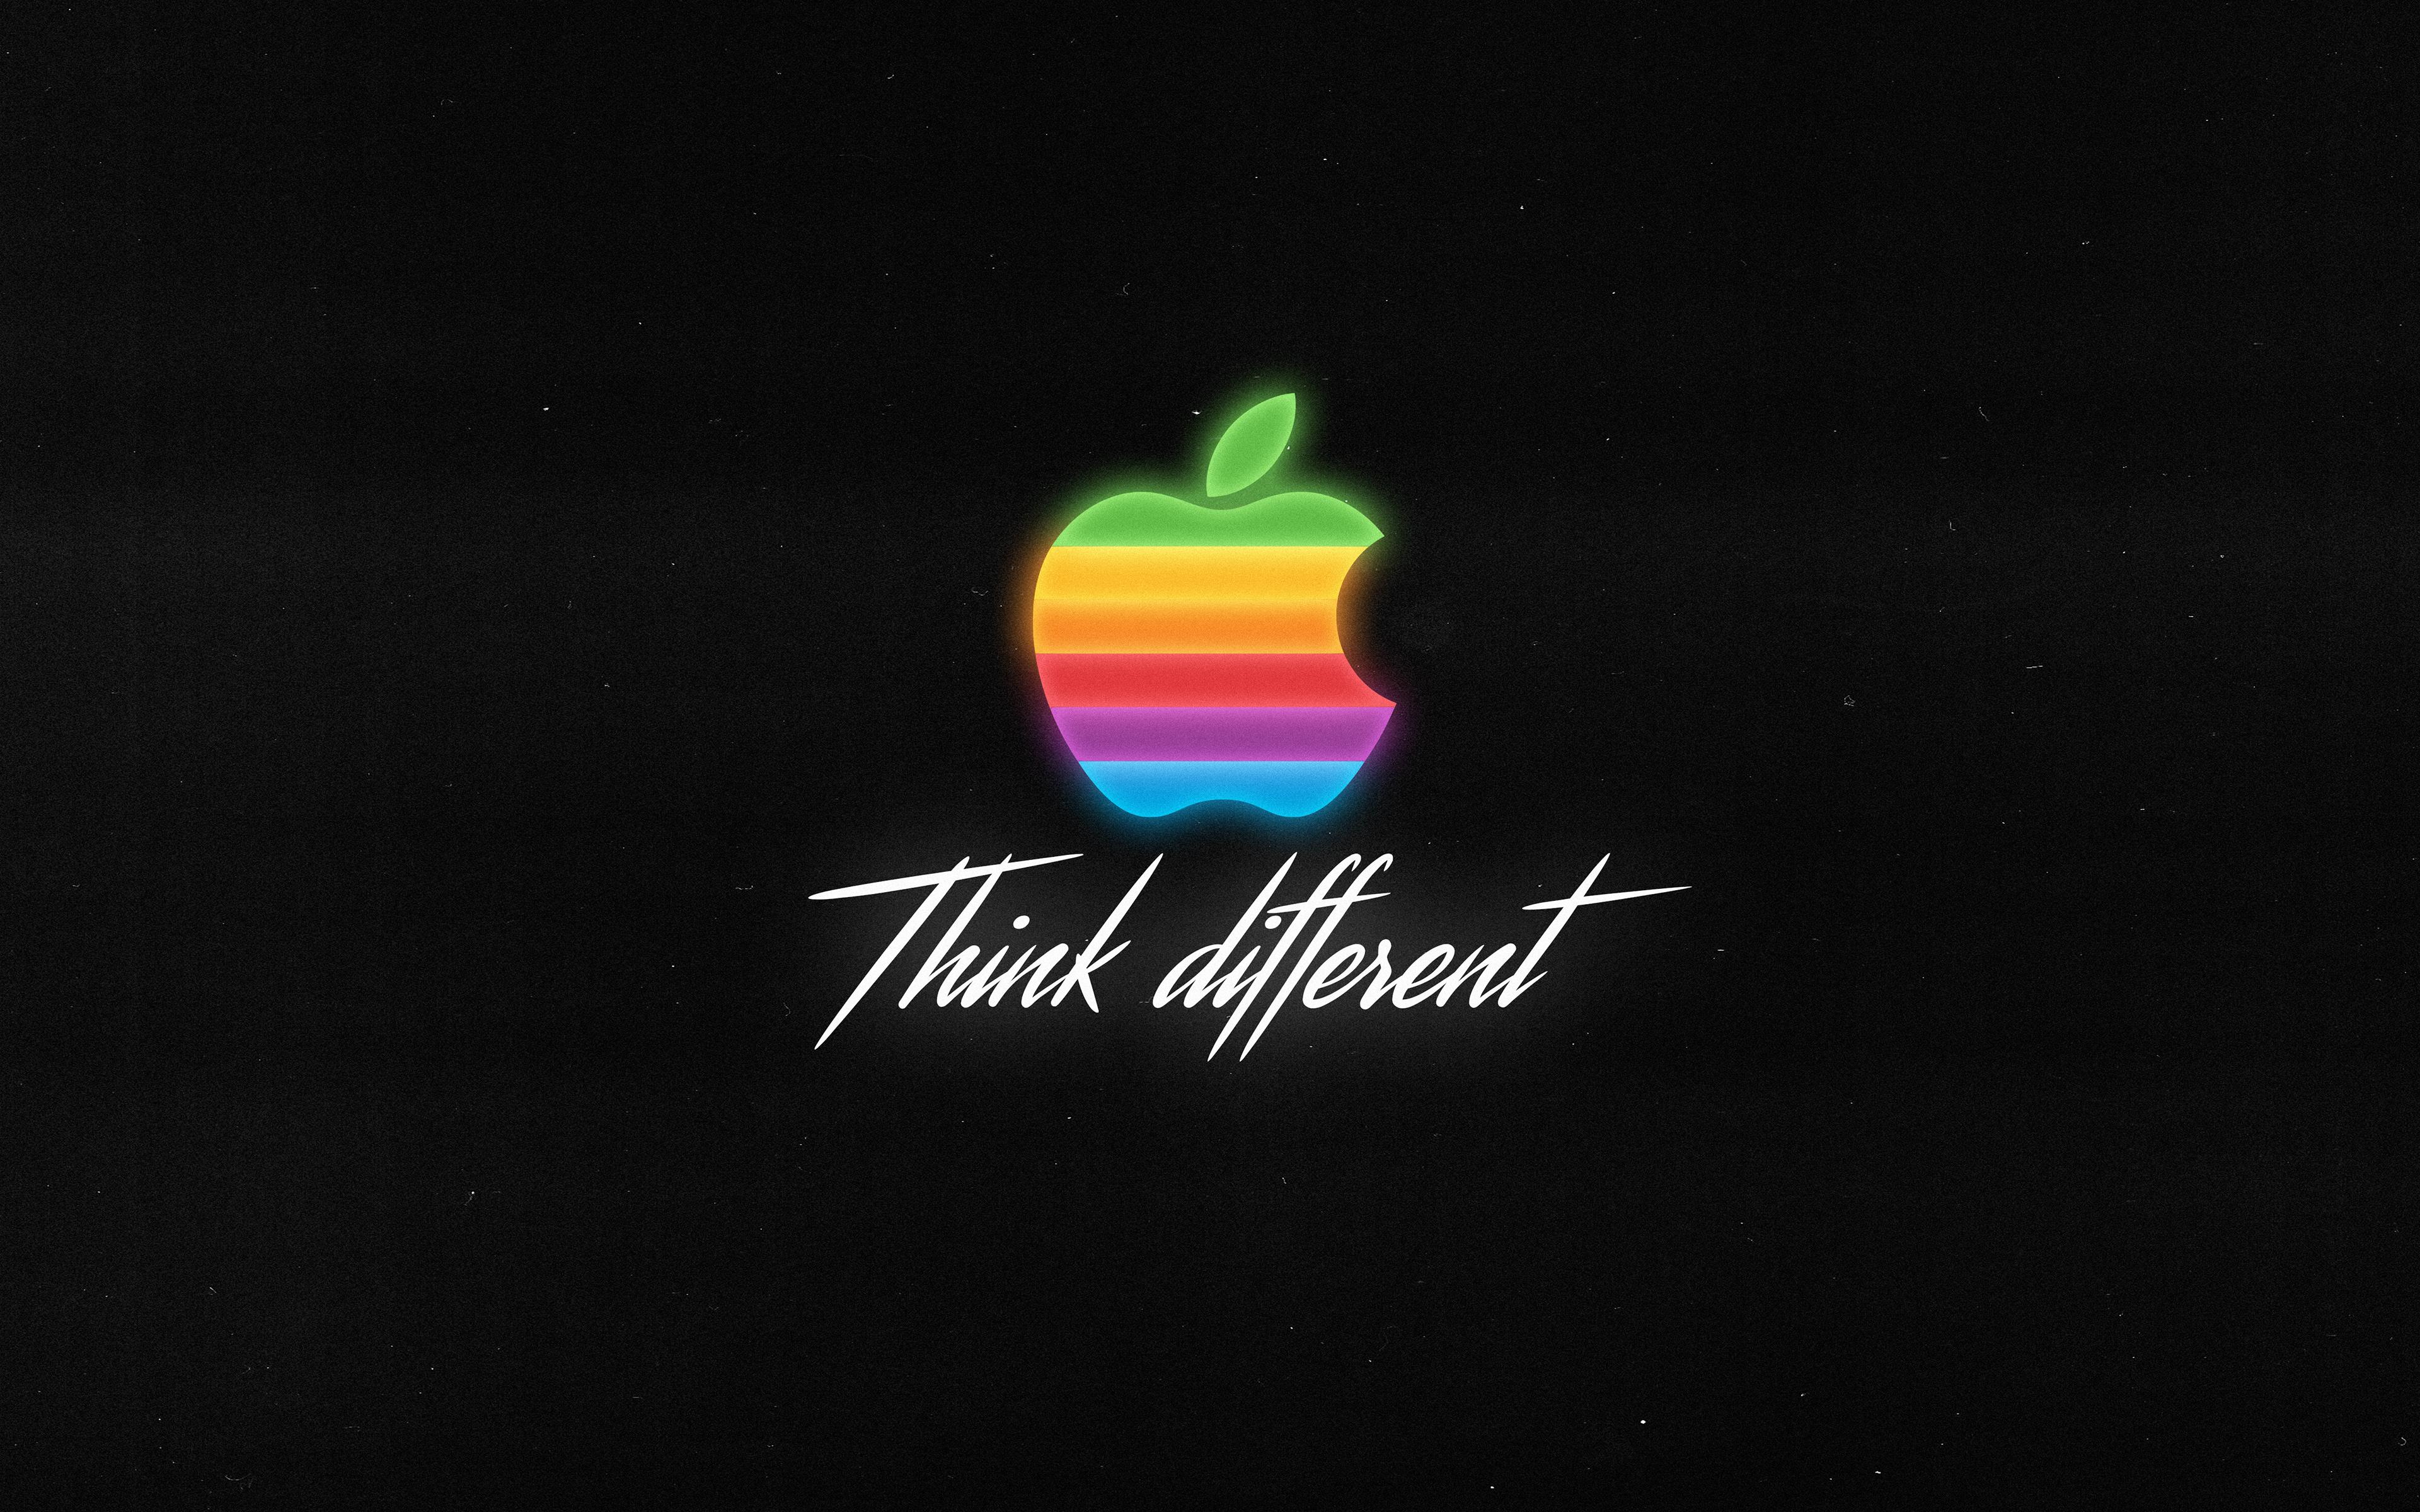 25 Top 4k wallpaper apple You Can Get It For Free - Aesthetic Arena